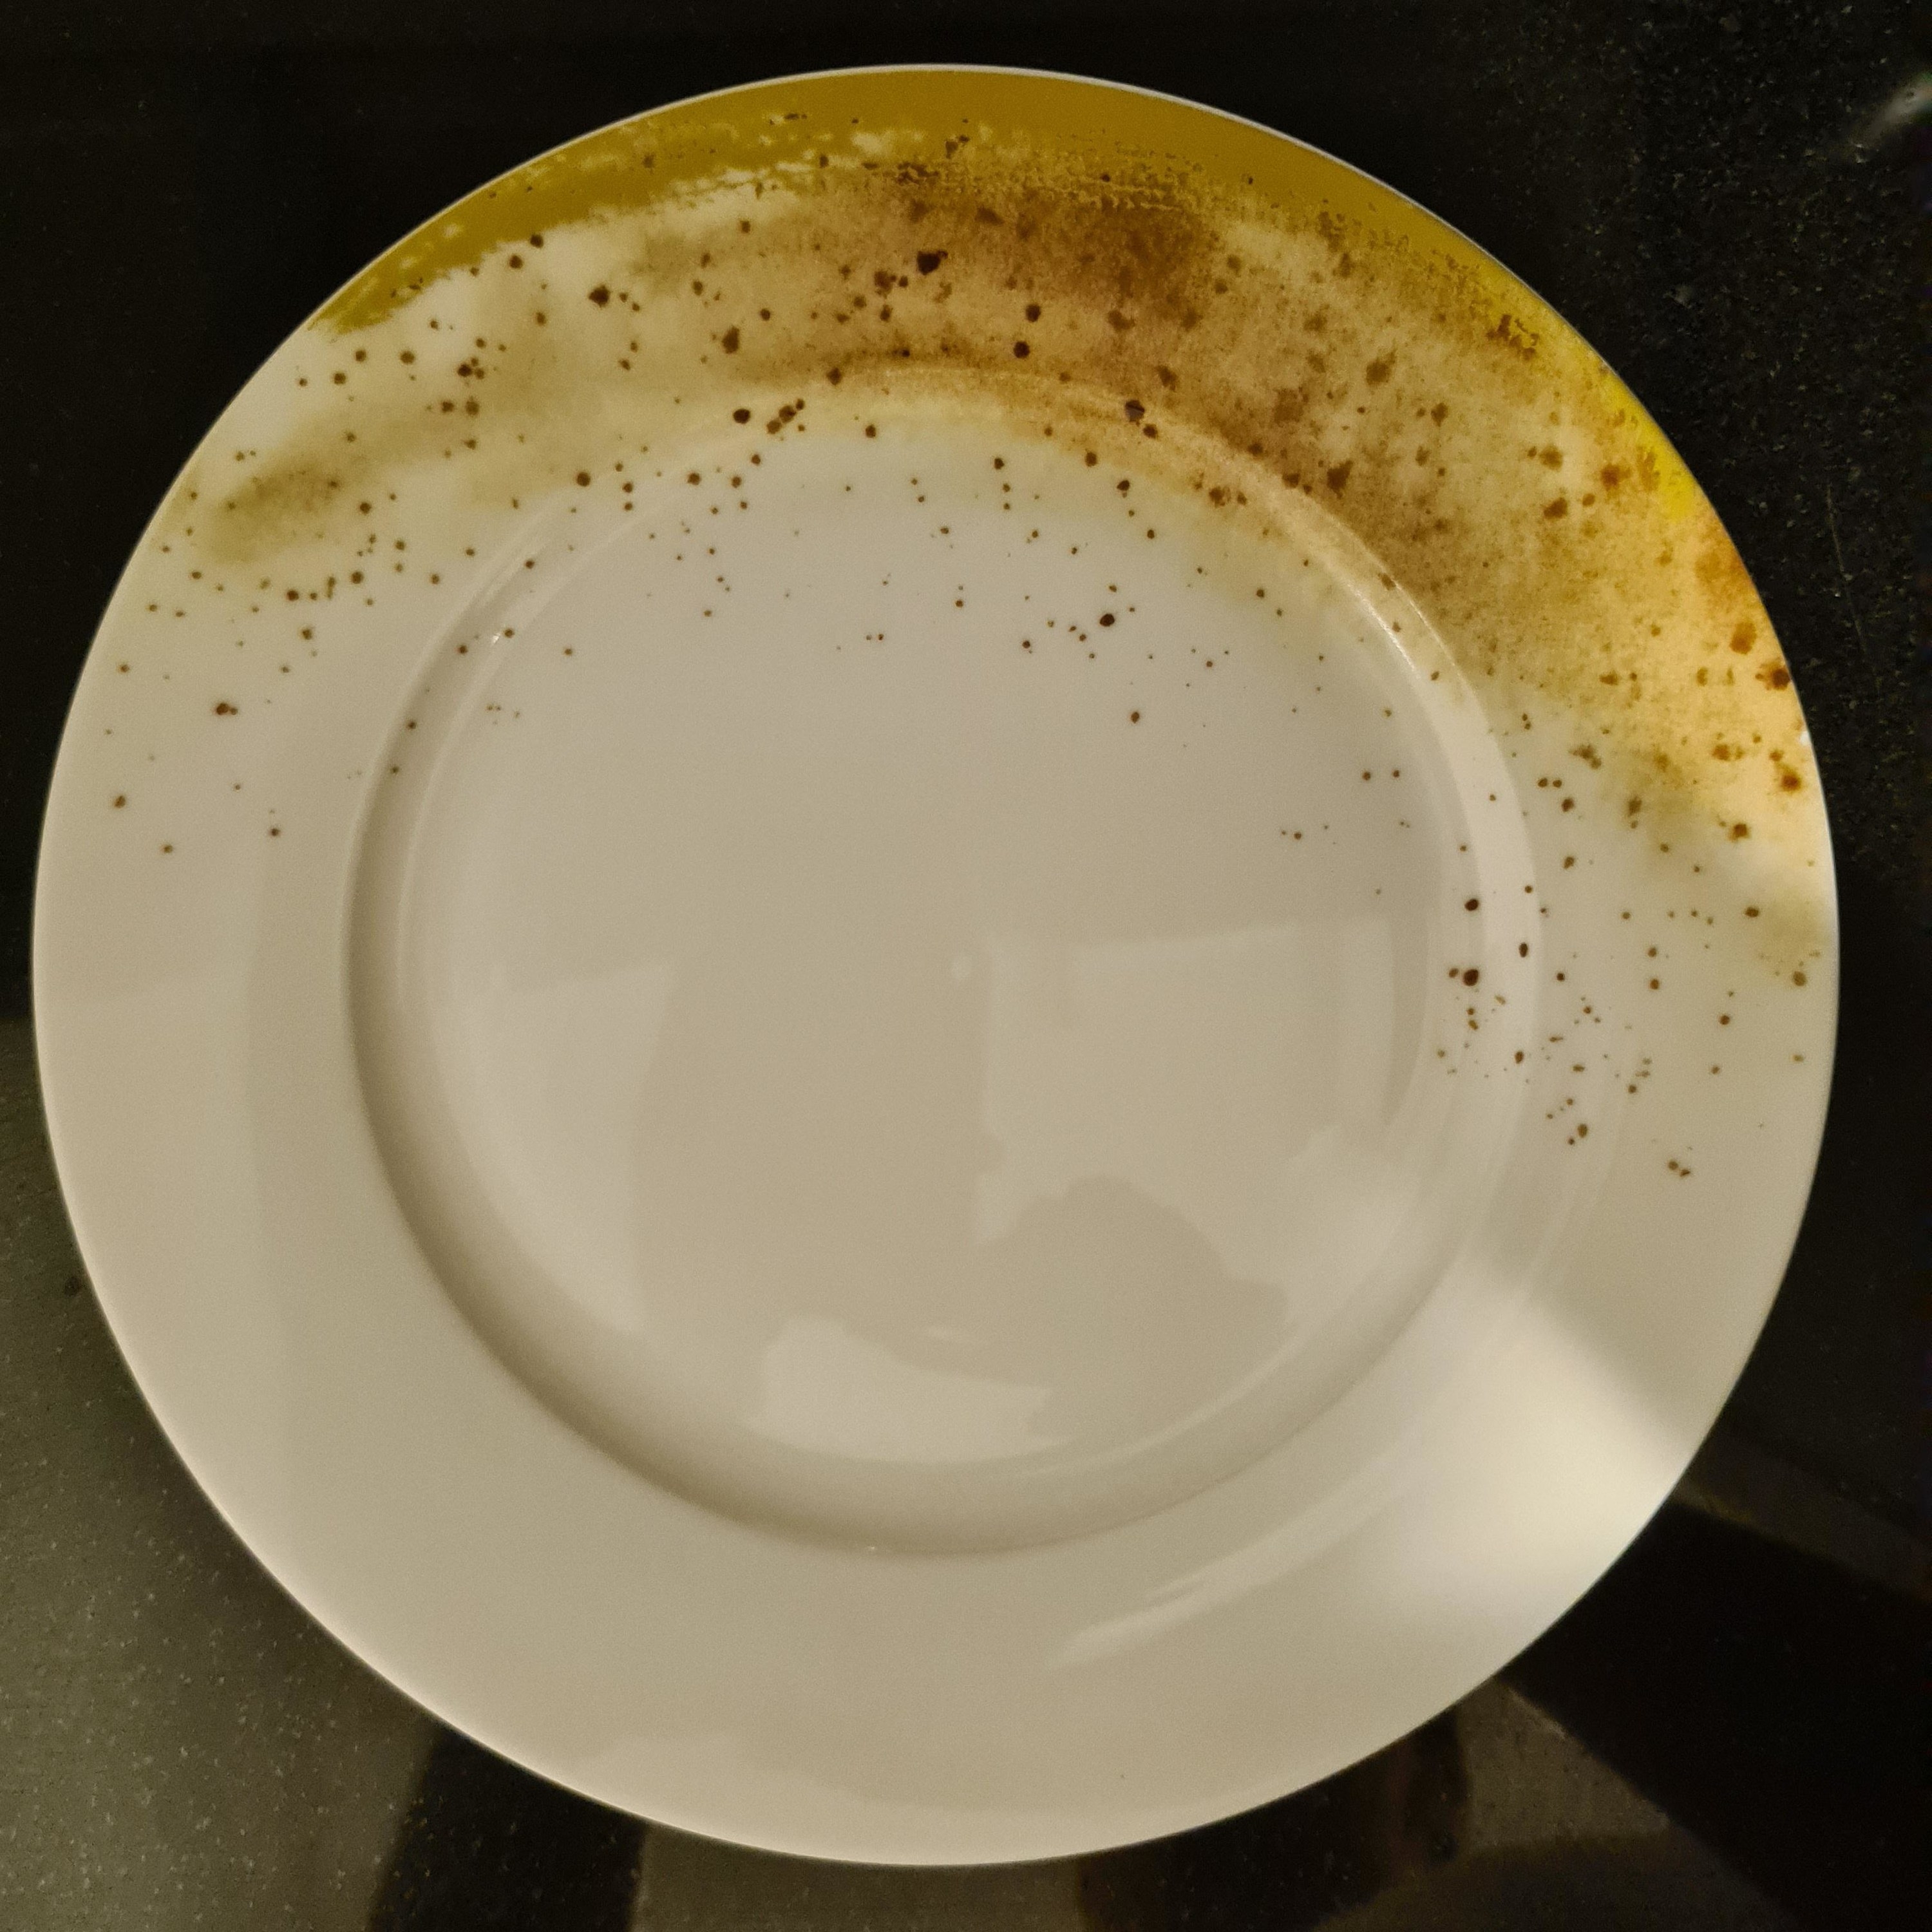 design that makes plate look dirty